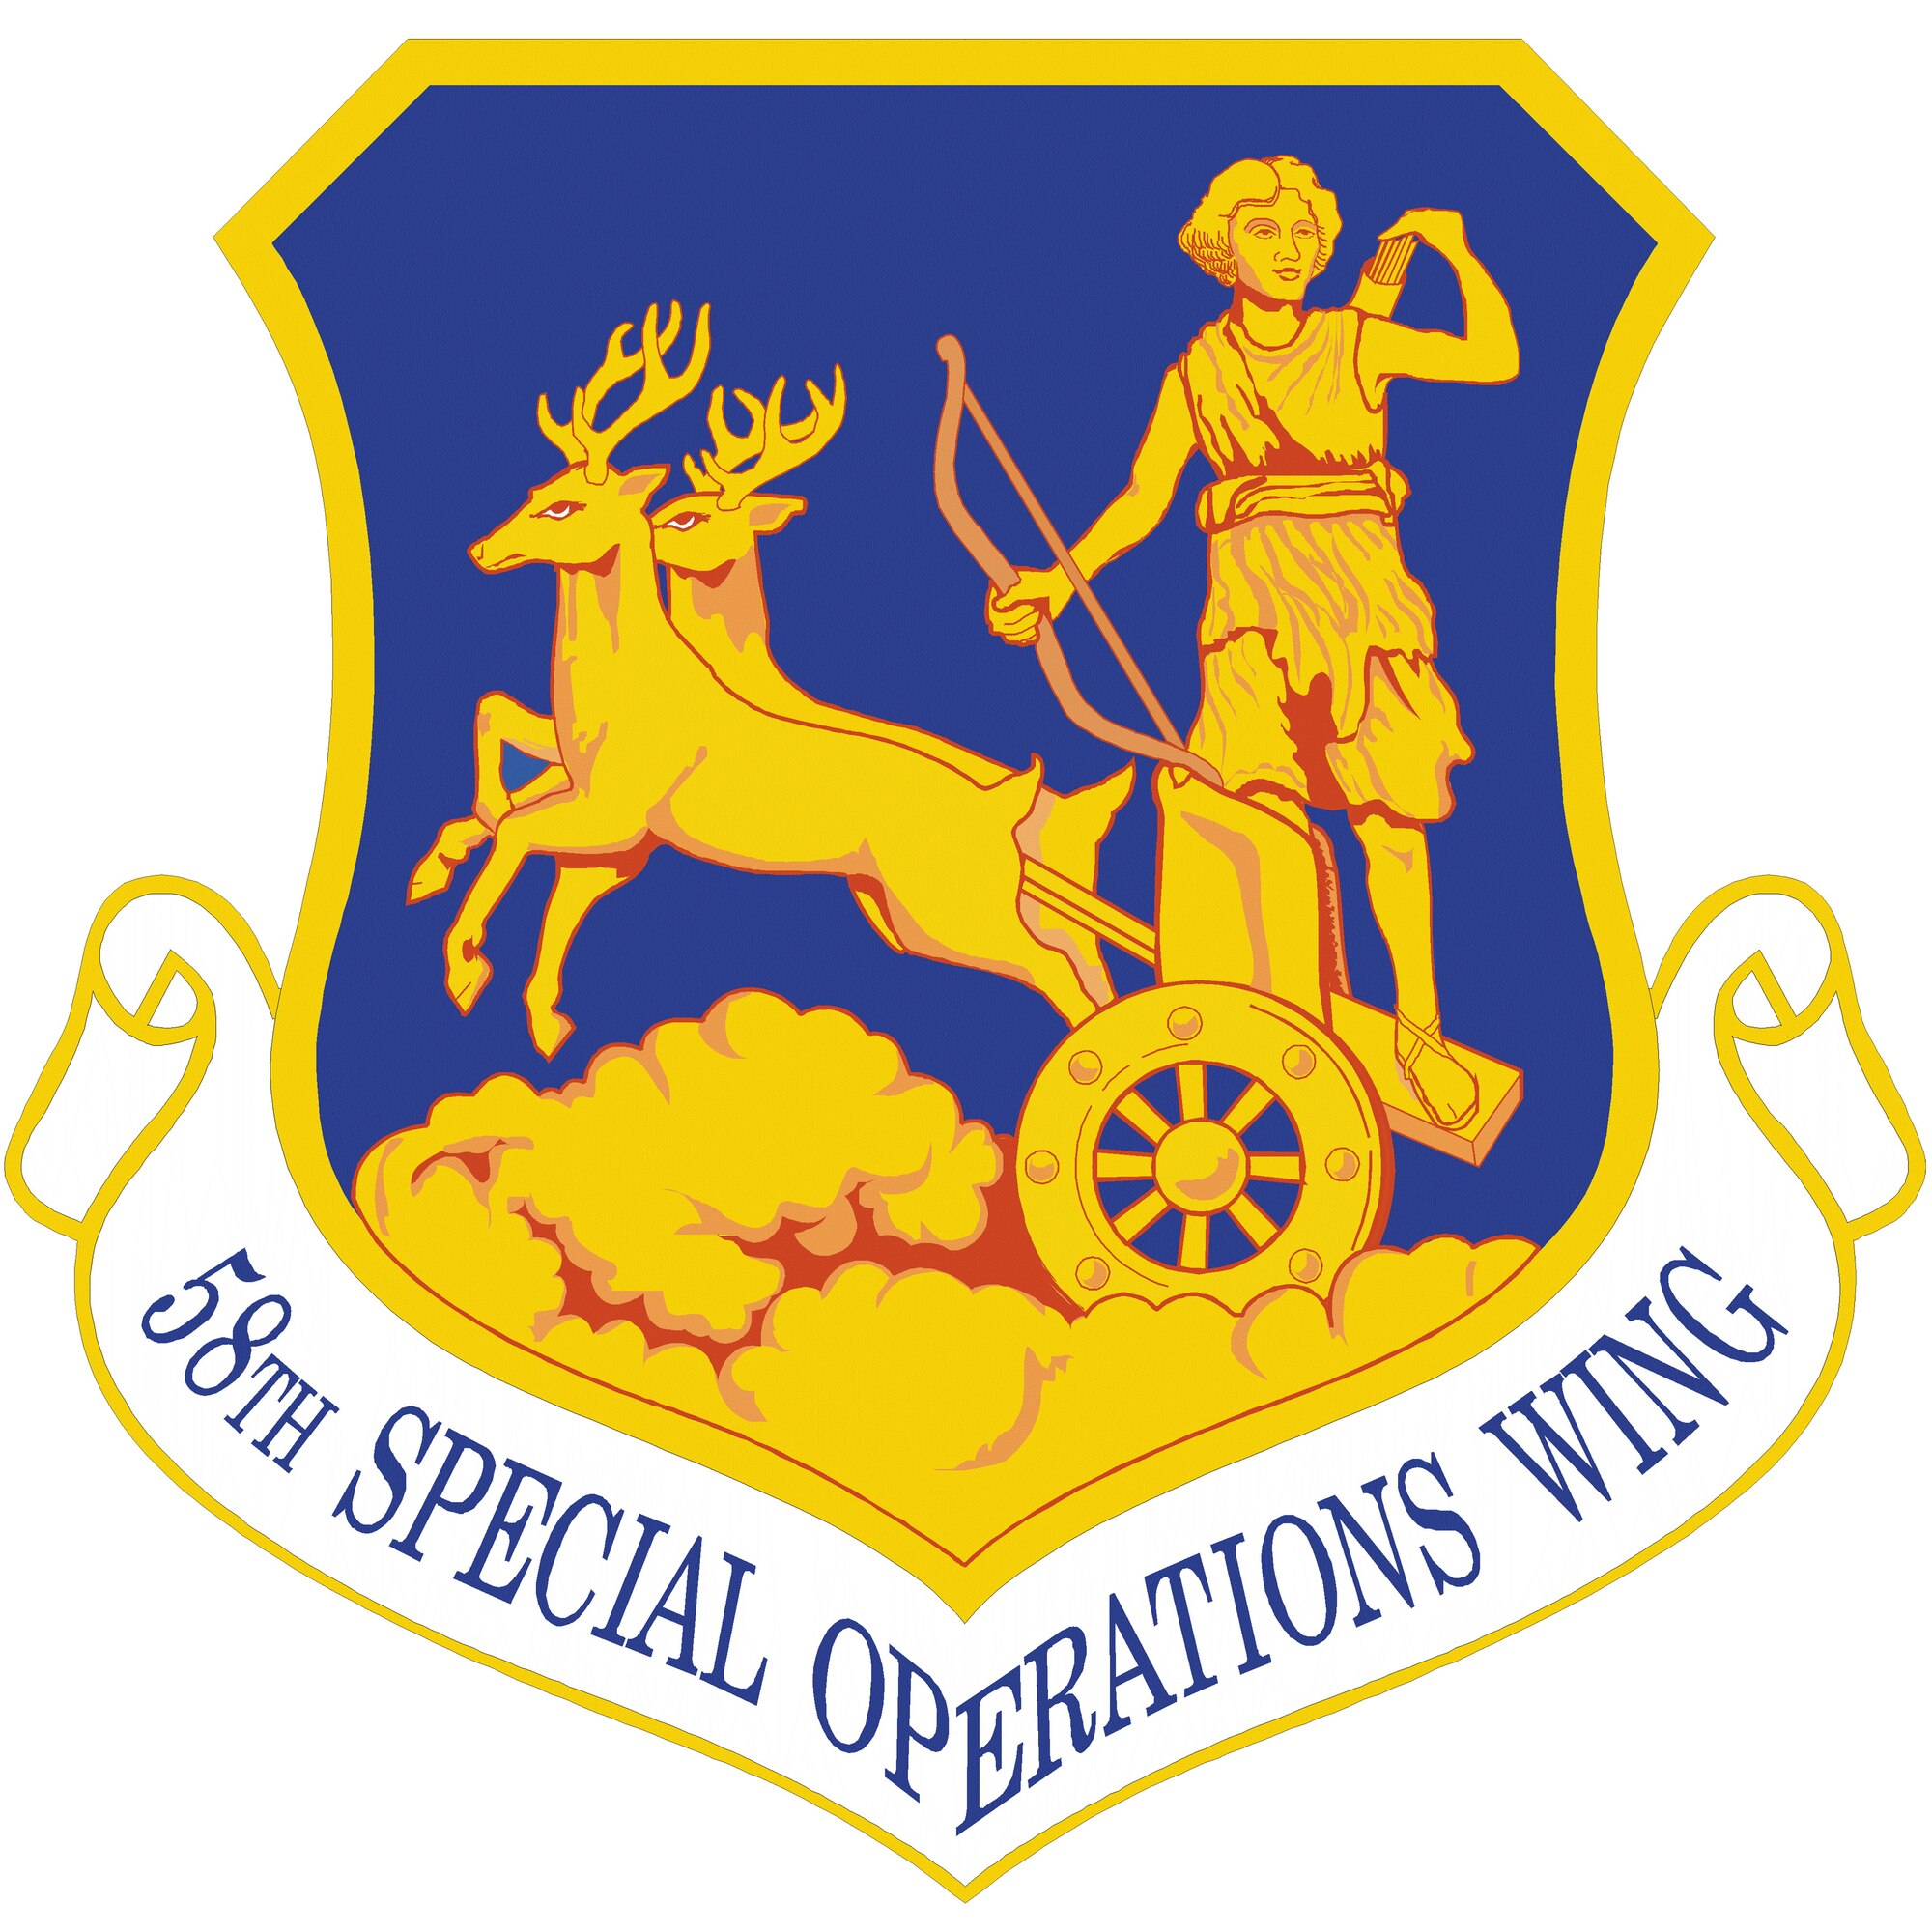 58th Special Operations Wing